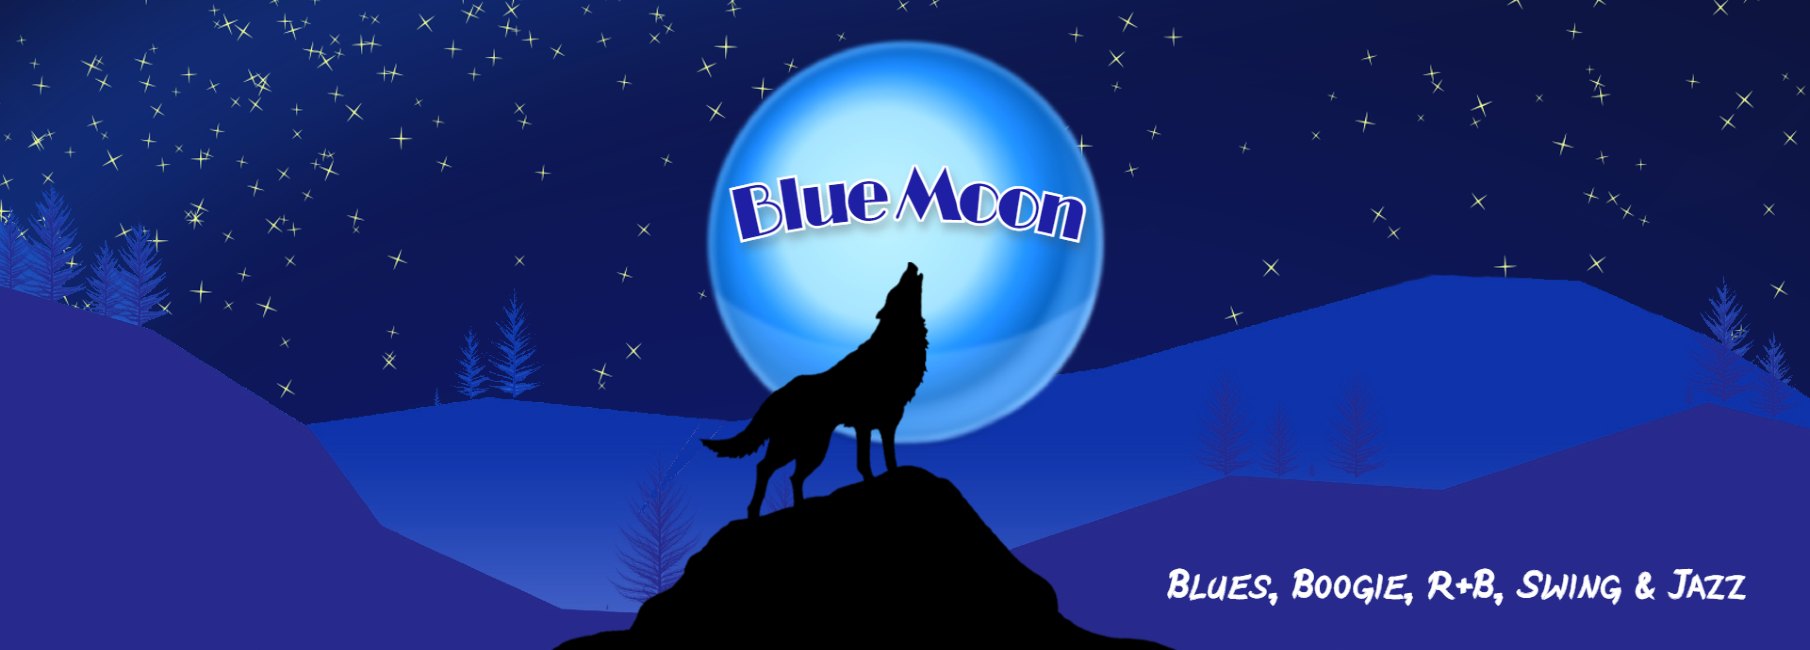 Blue Moon band - Blues, Boogie, R&B, Swing and Jazz